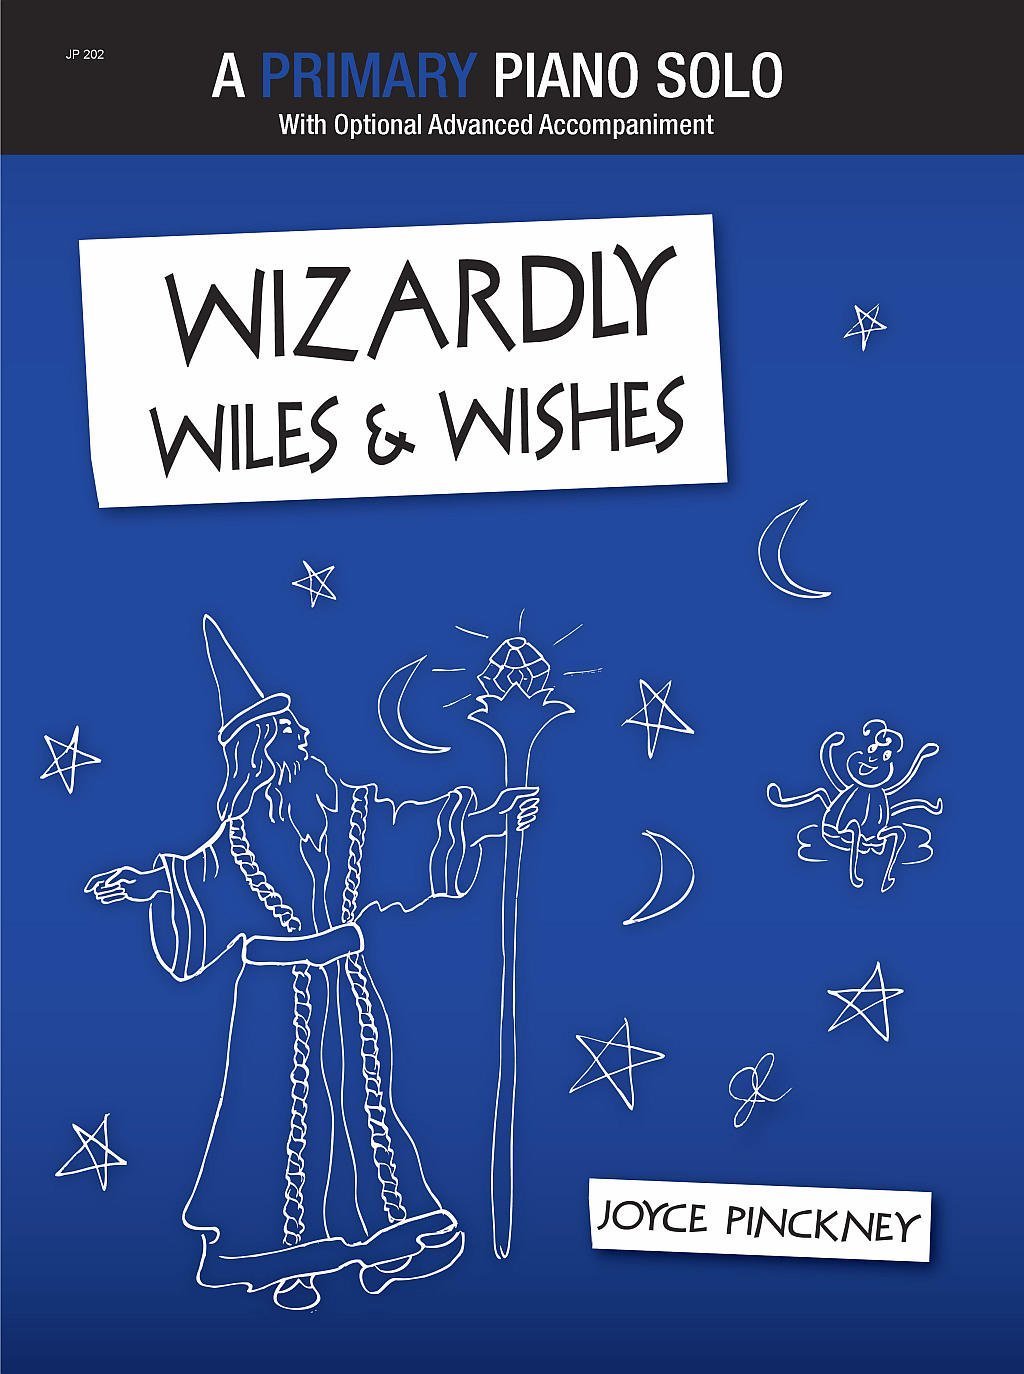 Wizardly Wiles & Wishes